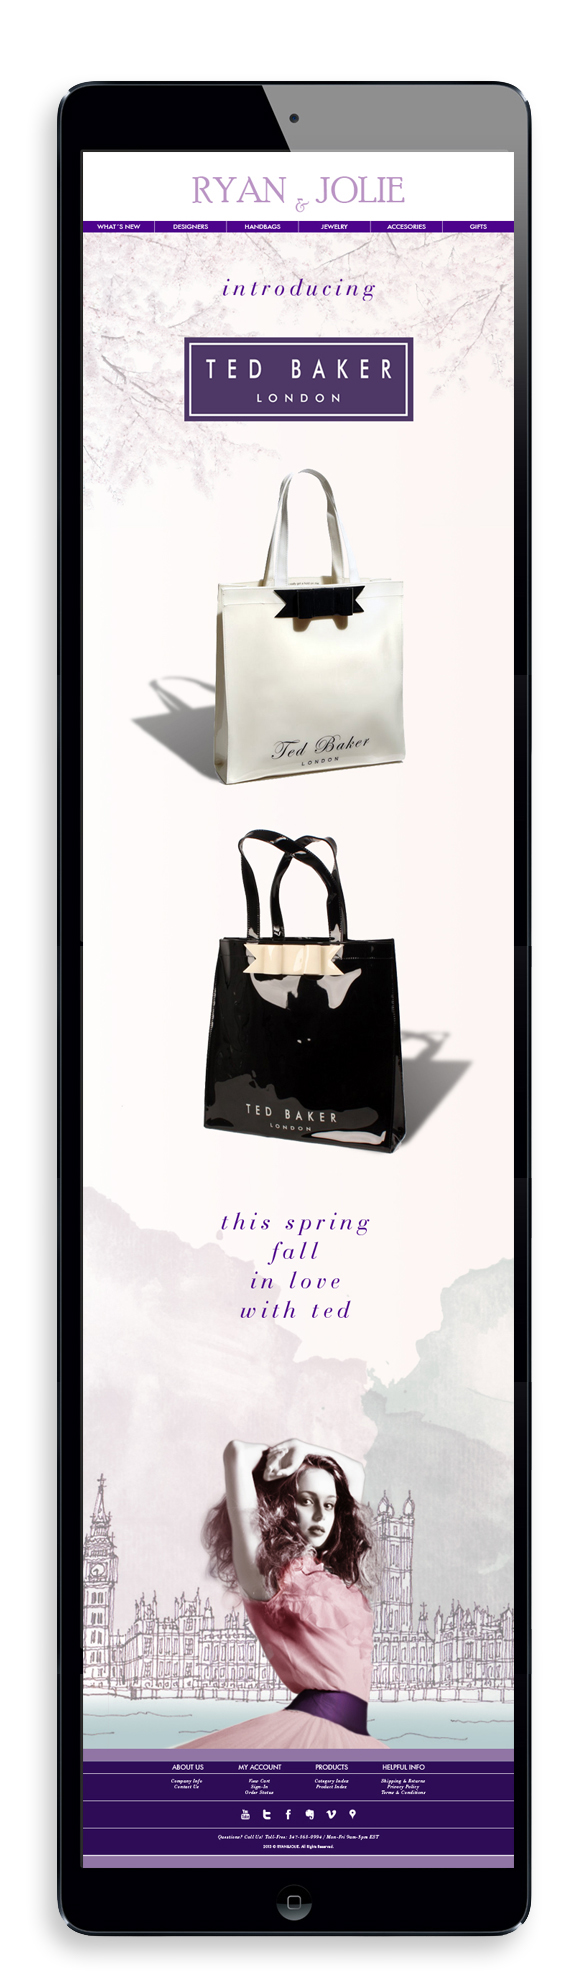 Ted Baker design newsletter Email ads online purple romance London New York nyc Beautiful spring pink